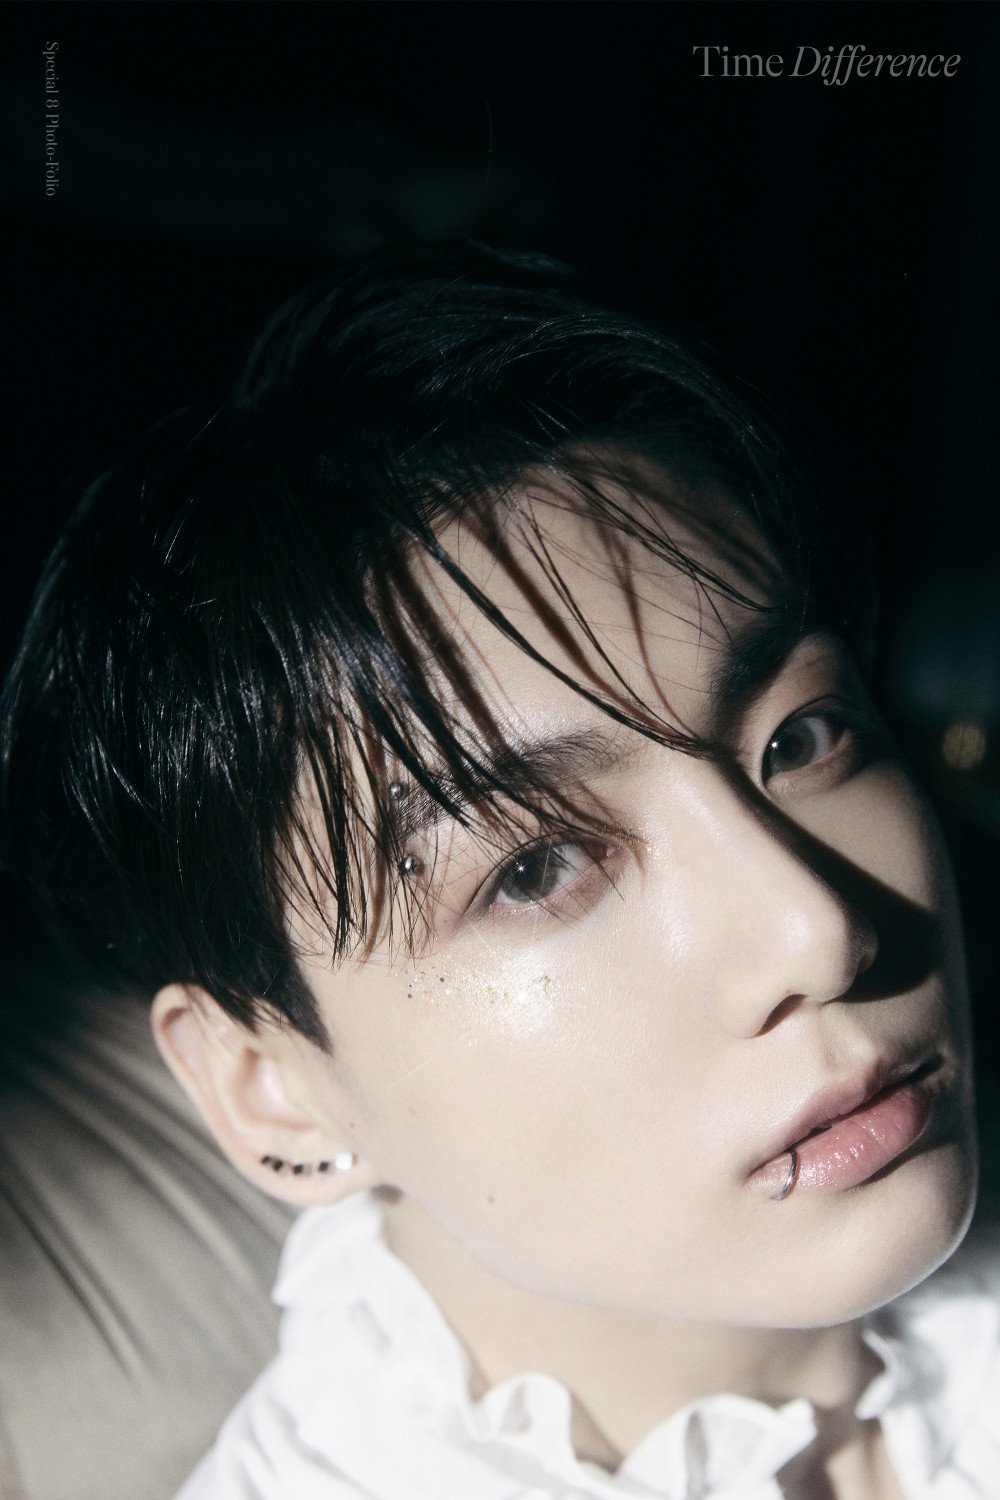 Jungkook is an alluring vampire in latest preview photos for his ...